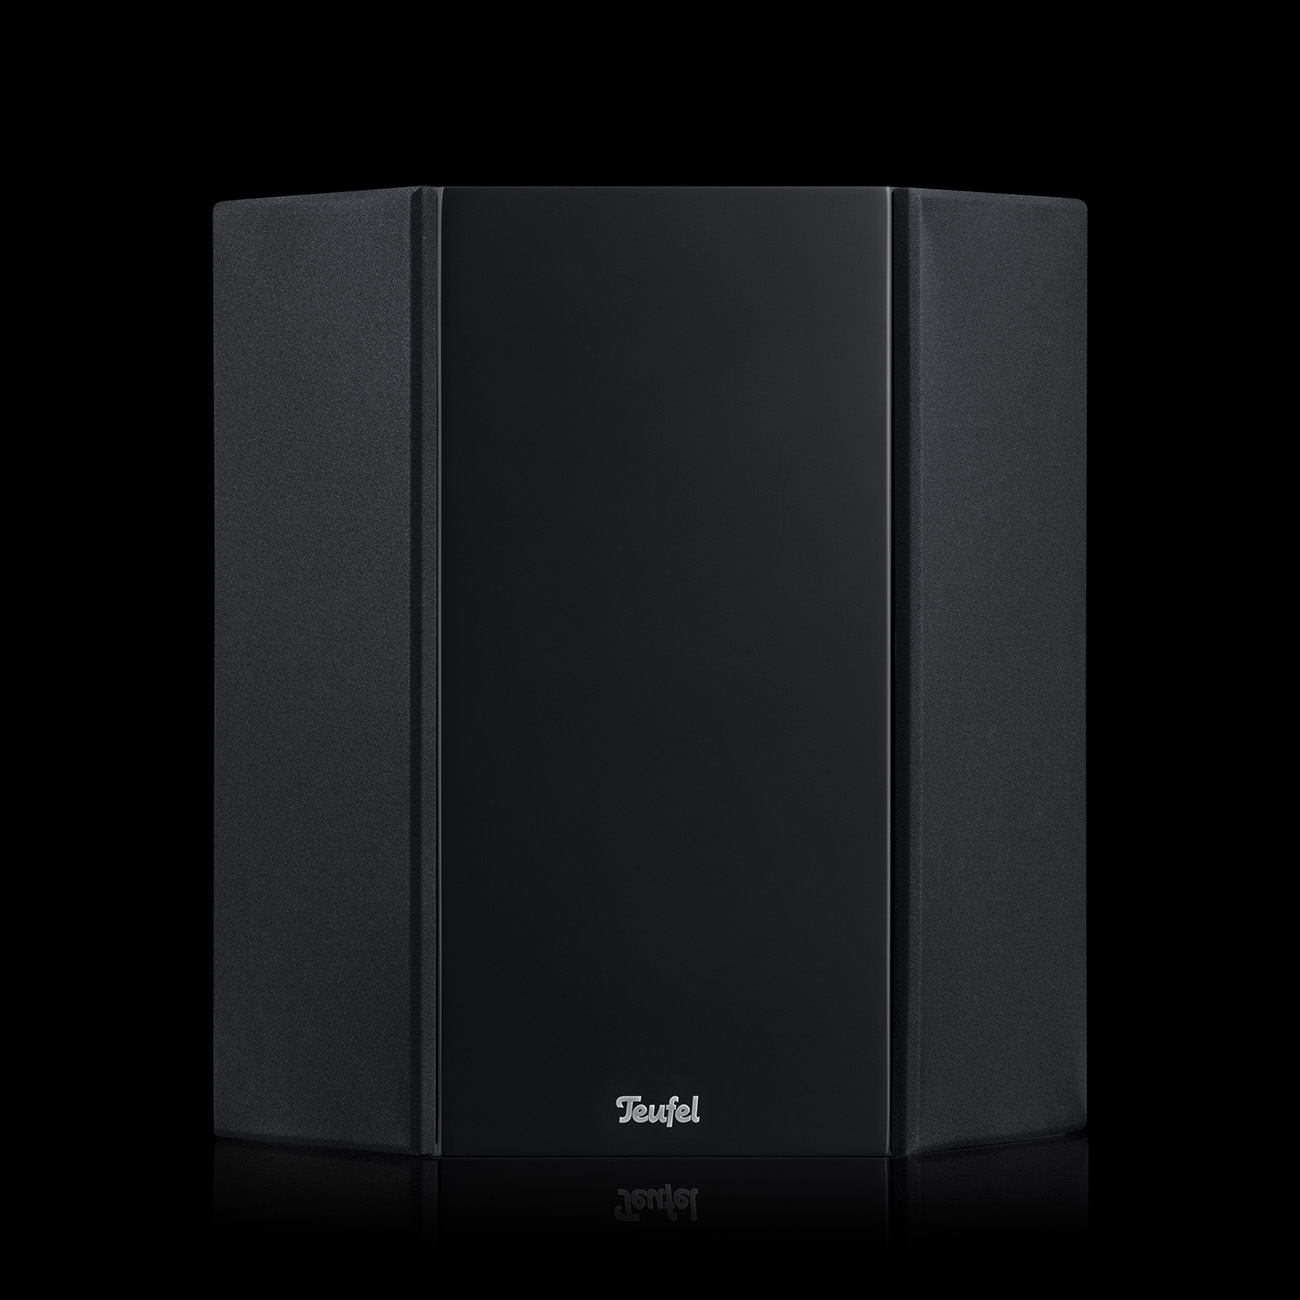 system-6-thx-select-dipol-front-straight-black-cover-on-black-1300x1300x72.jpg